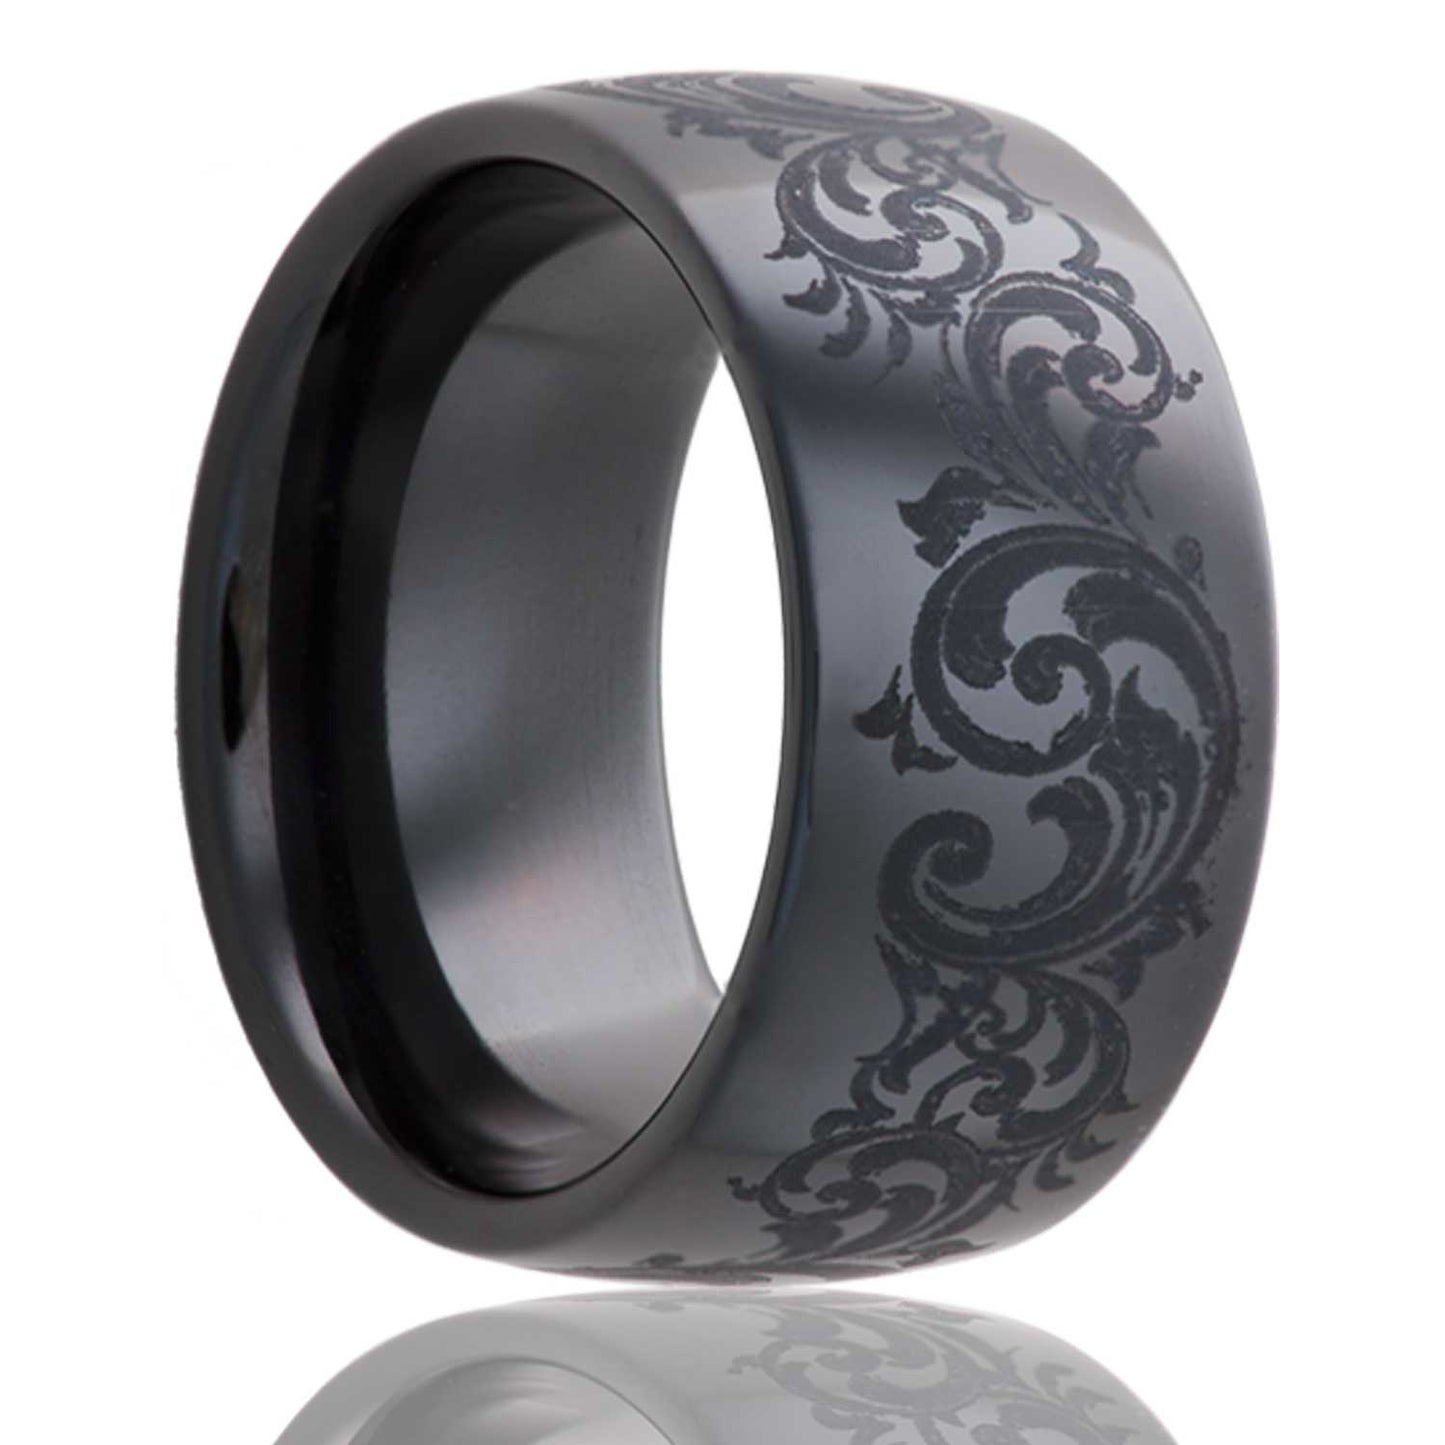 A swirl pattern domed black ceramic wedding band displayed on a neutral white background.